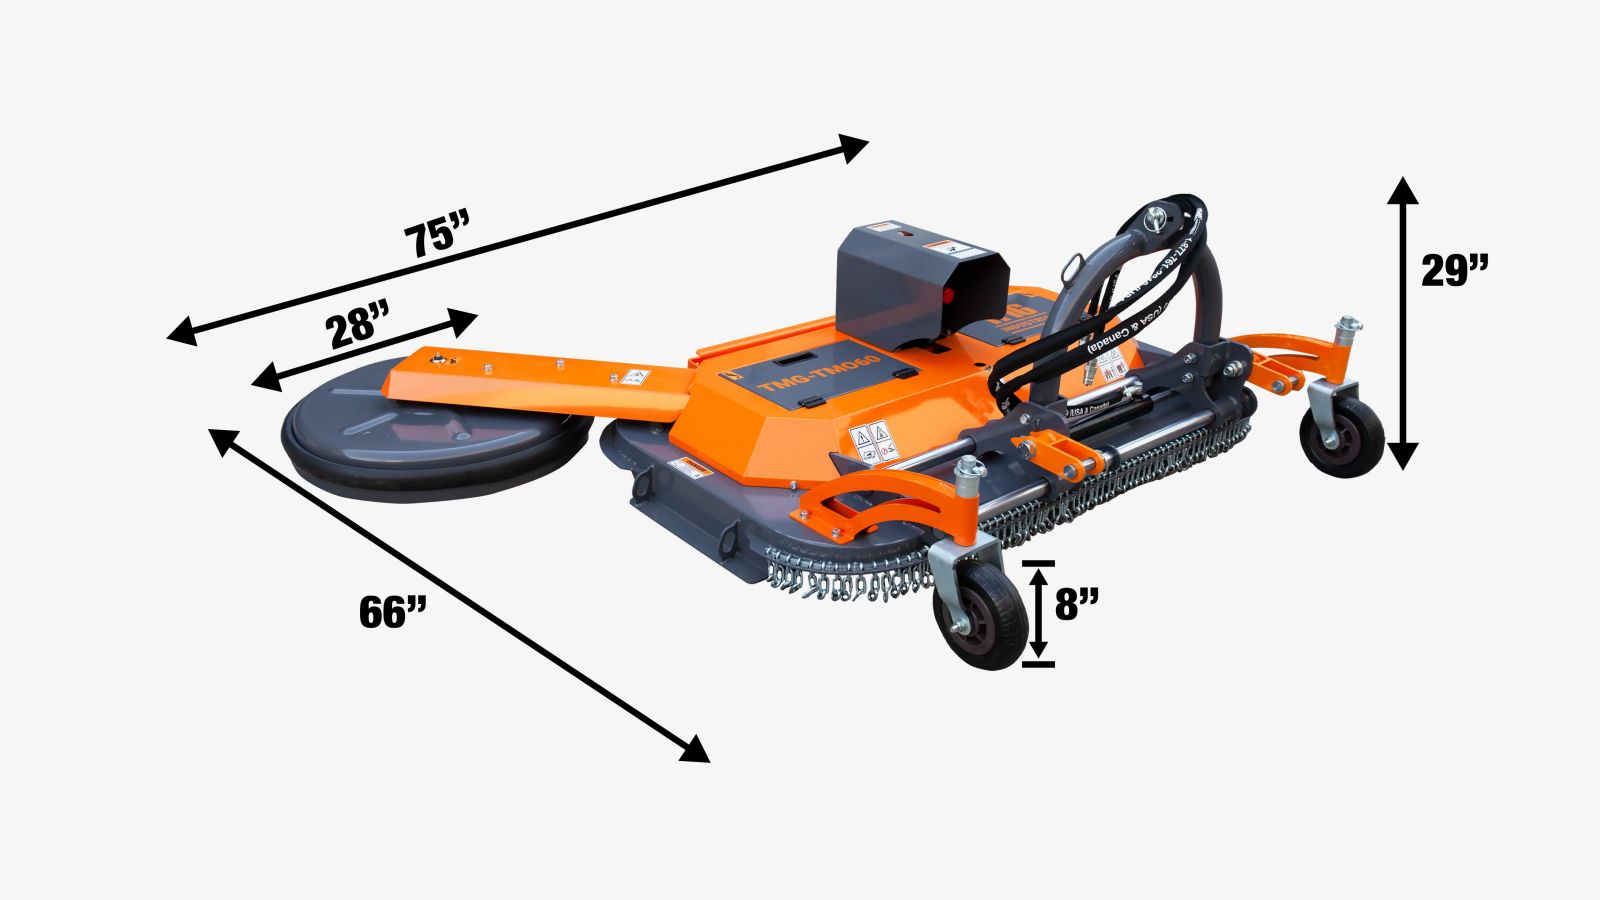 TMG Industrial 60” Offset Orchard Finishing Weeding Mower w/Swivel-Arm Disc Device, 3-Point Hitch, TMG-TMO60-specifications-image